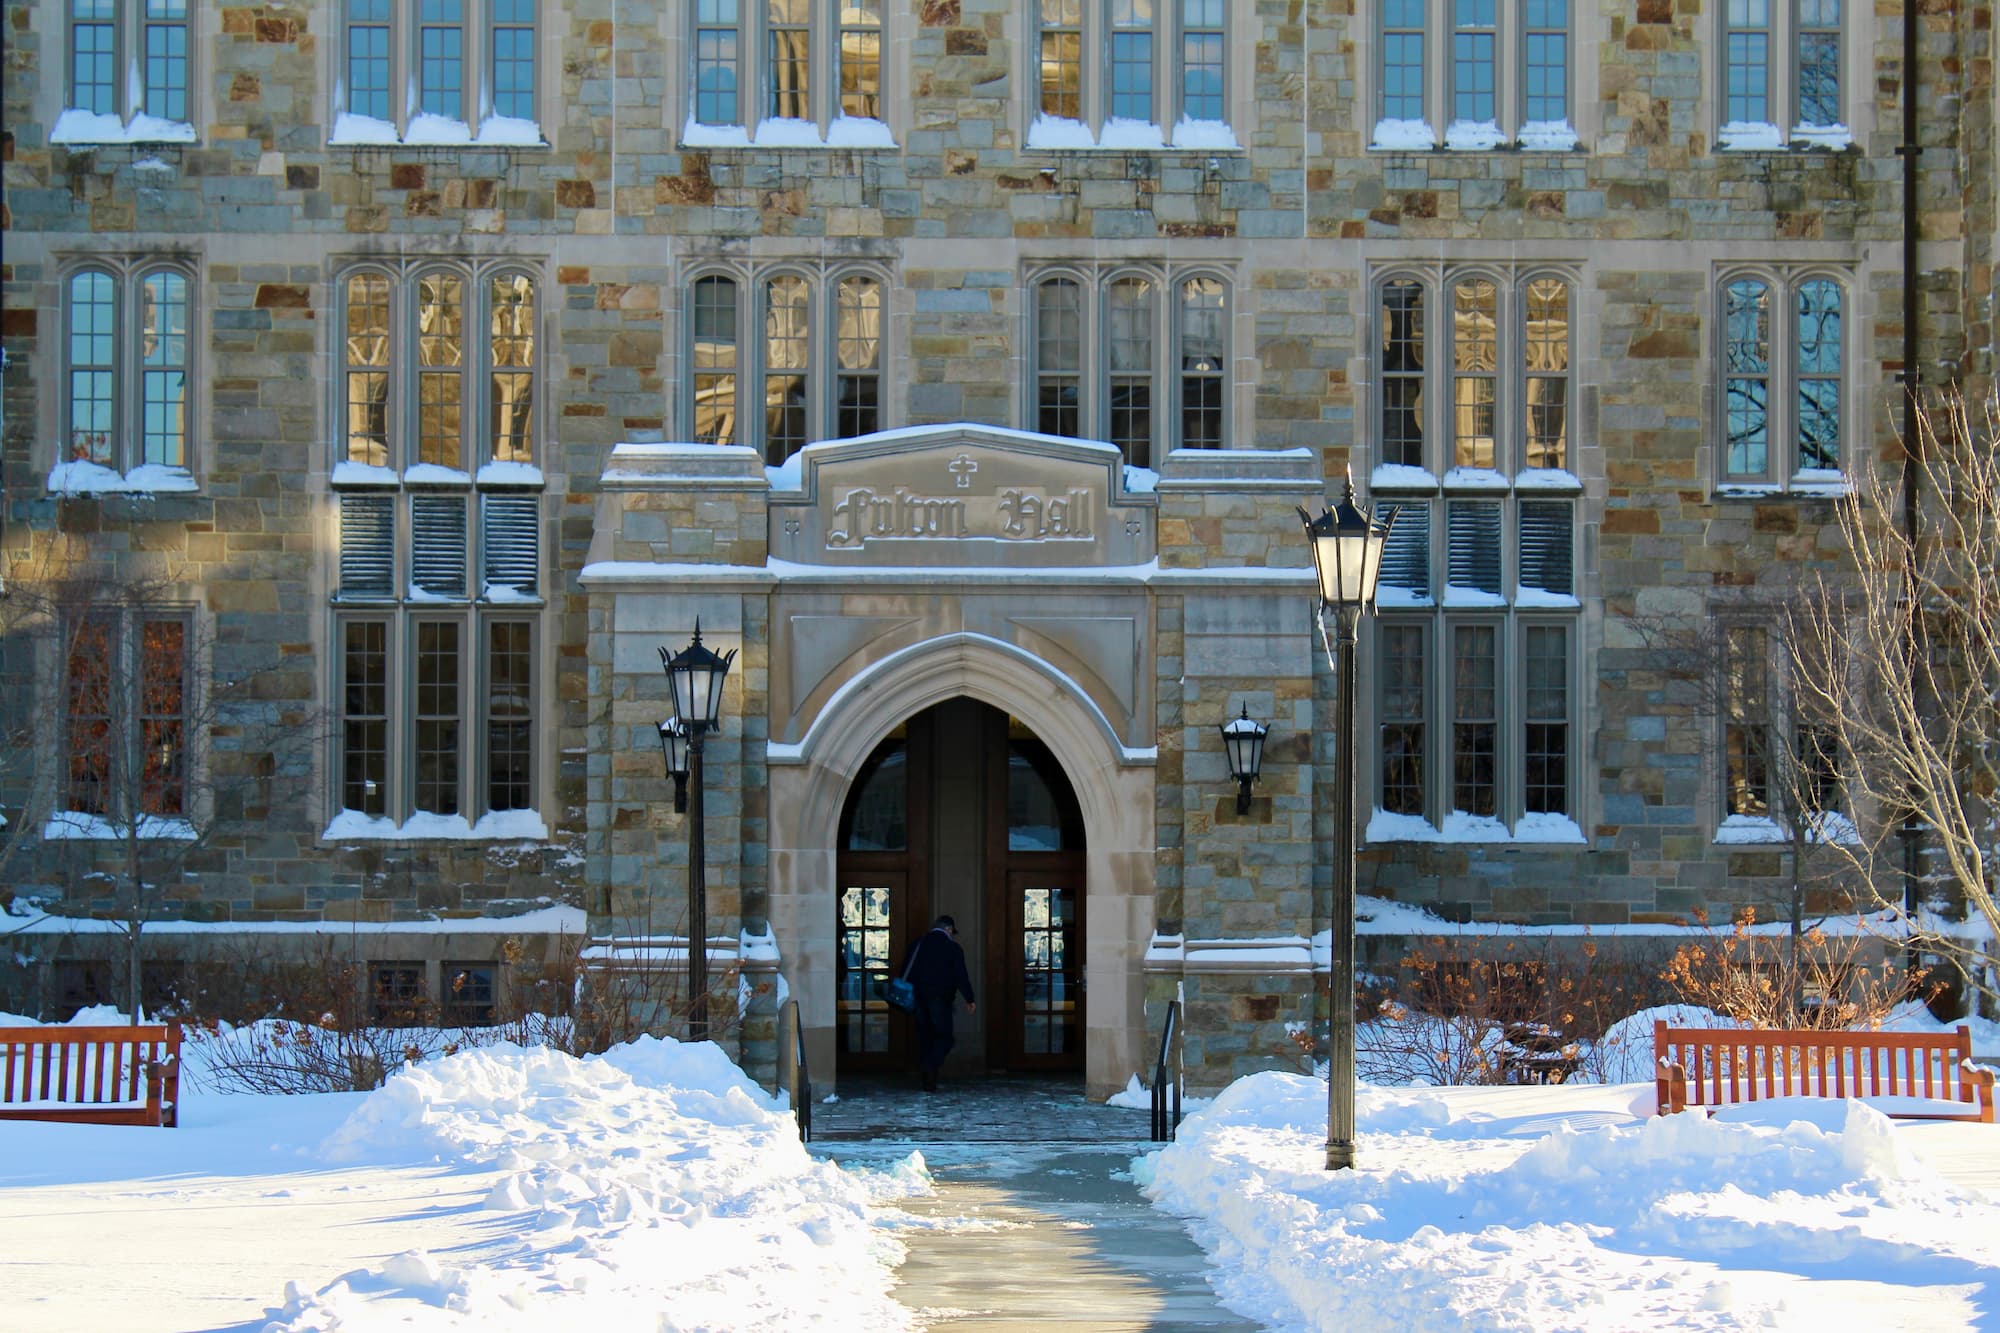 Fulton Hall entryway with snow on the ground